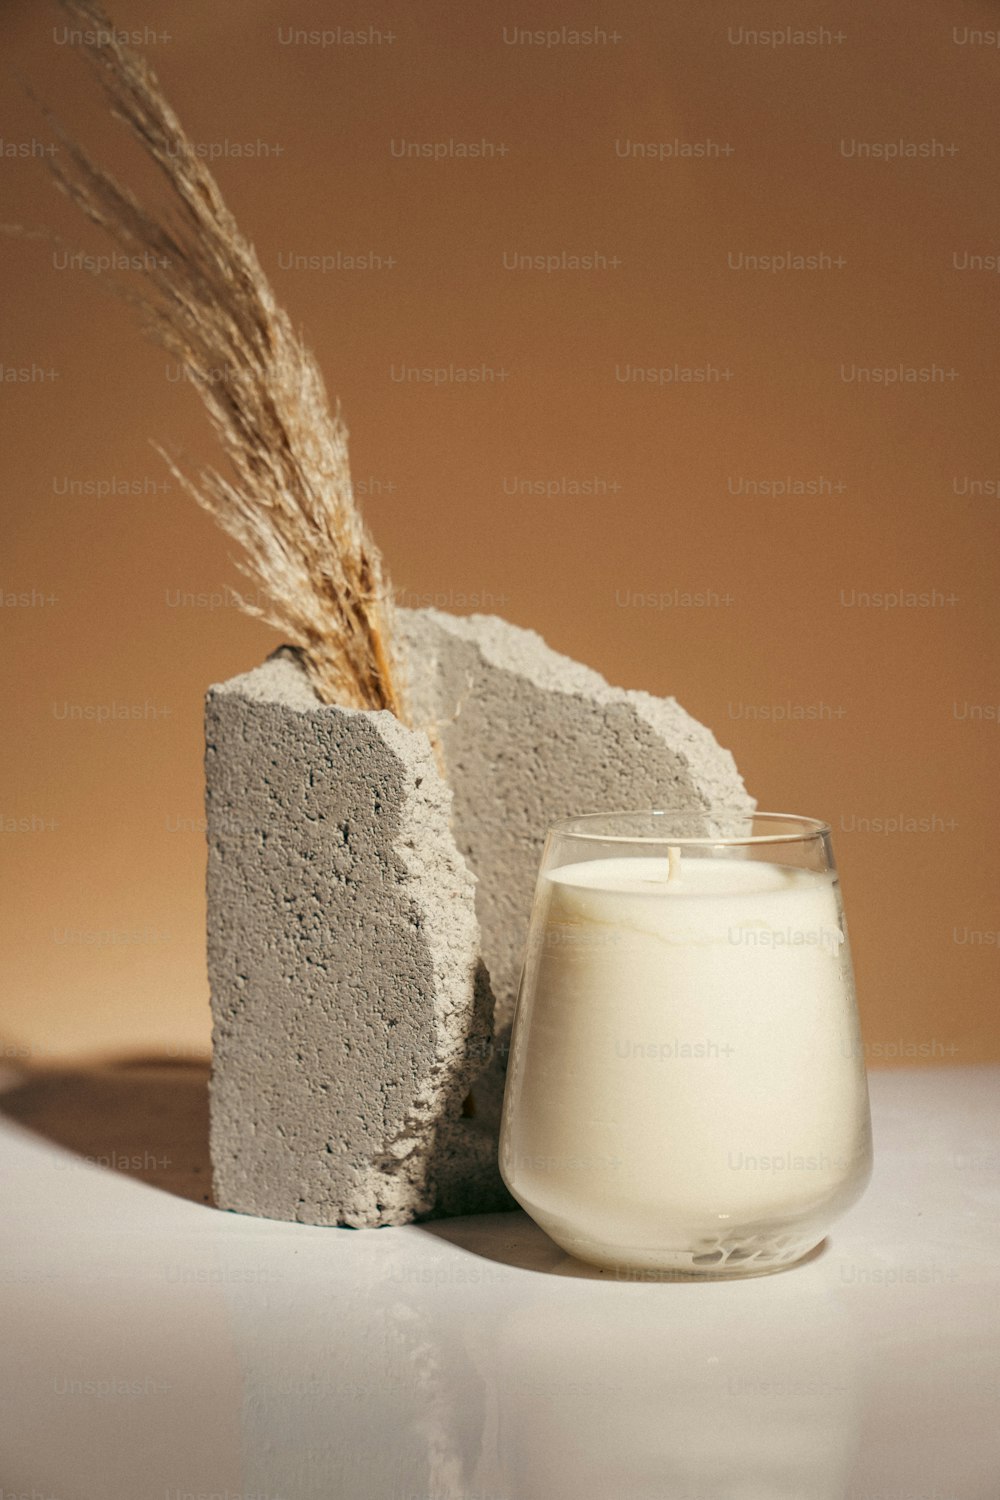 a glass of milk next to a block of cement